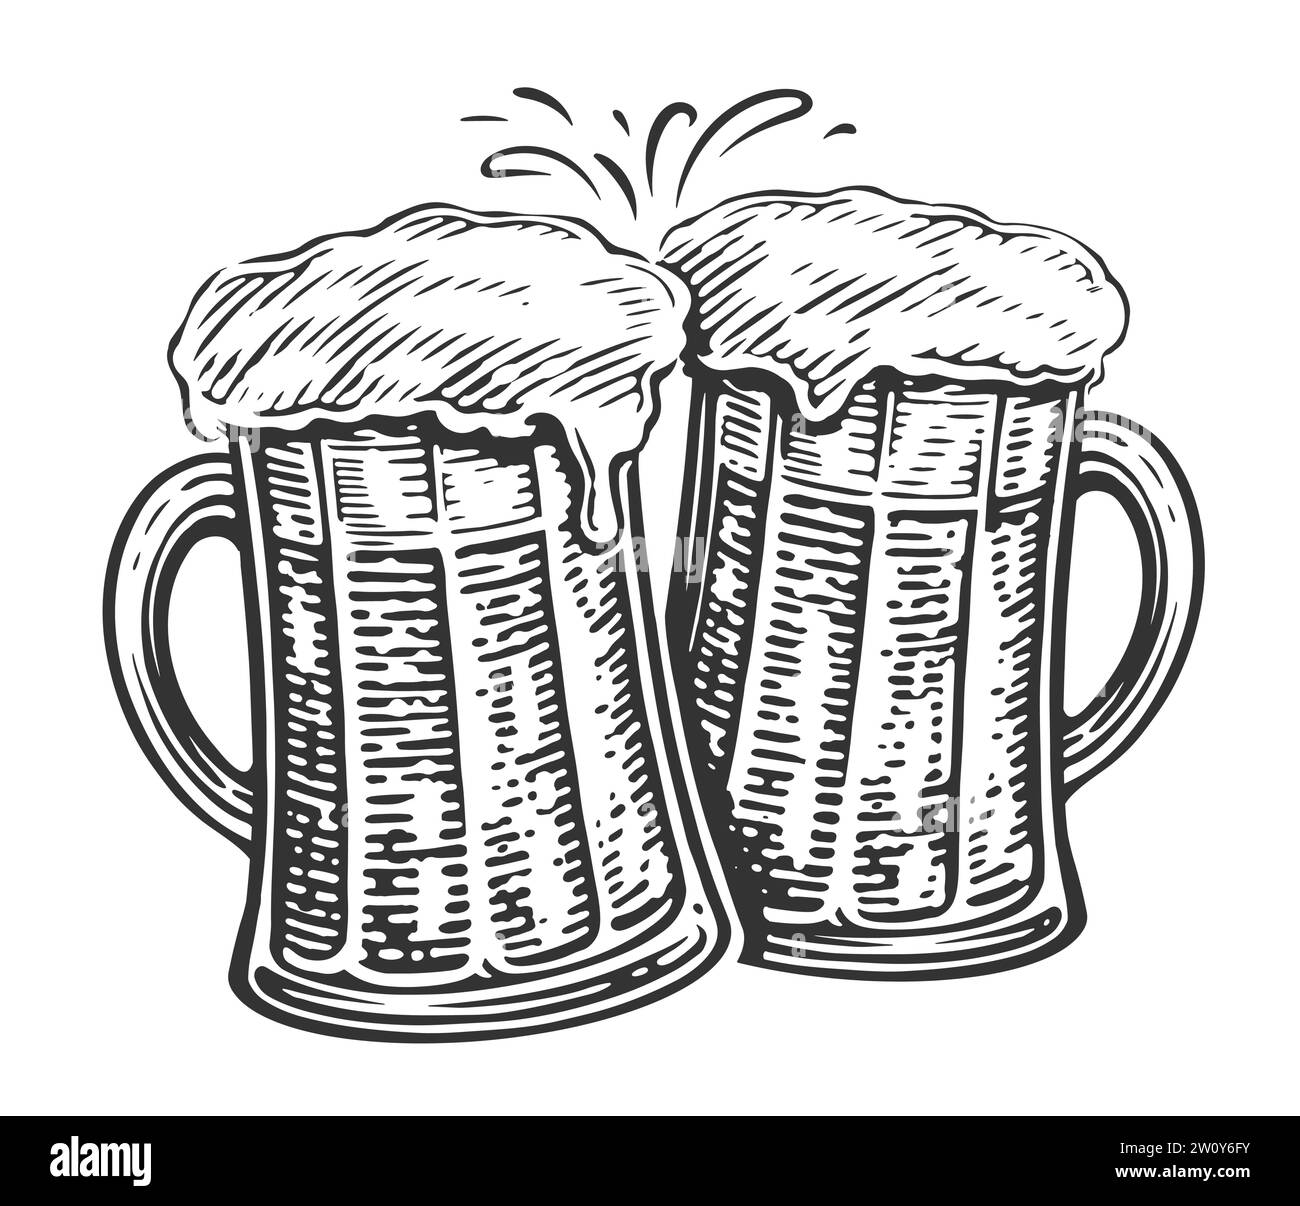 Cheers, Two beer mugs toast. Clinking glass glasses full of ale and splashes of foam, illustration Stock Vector